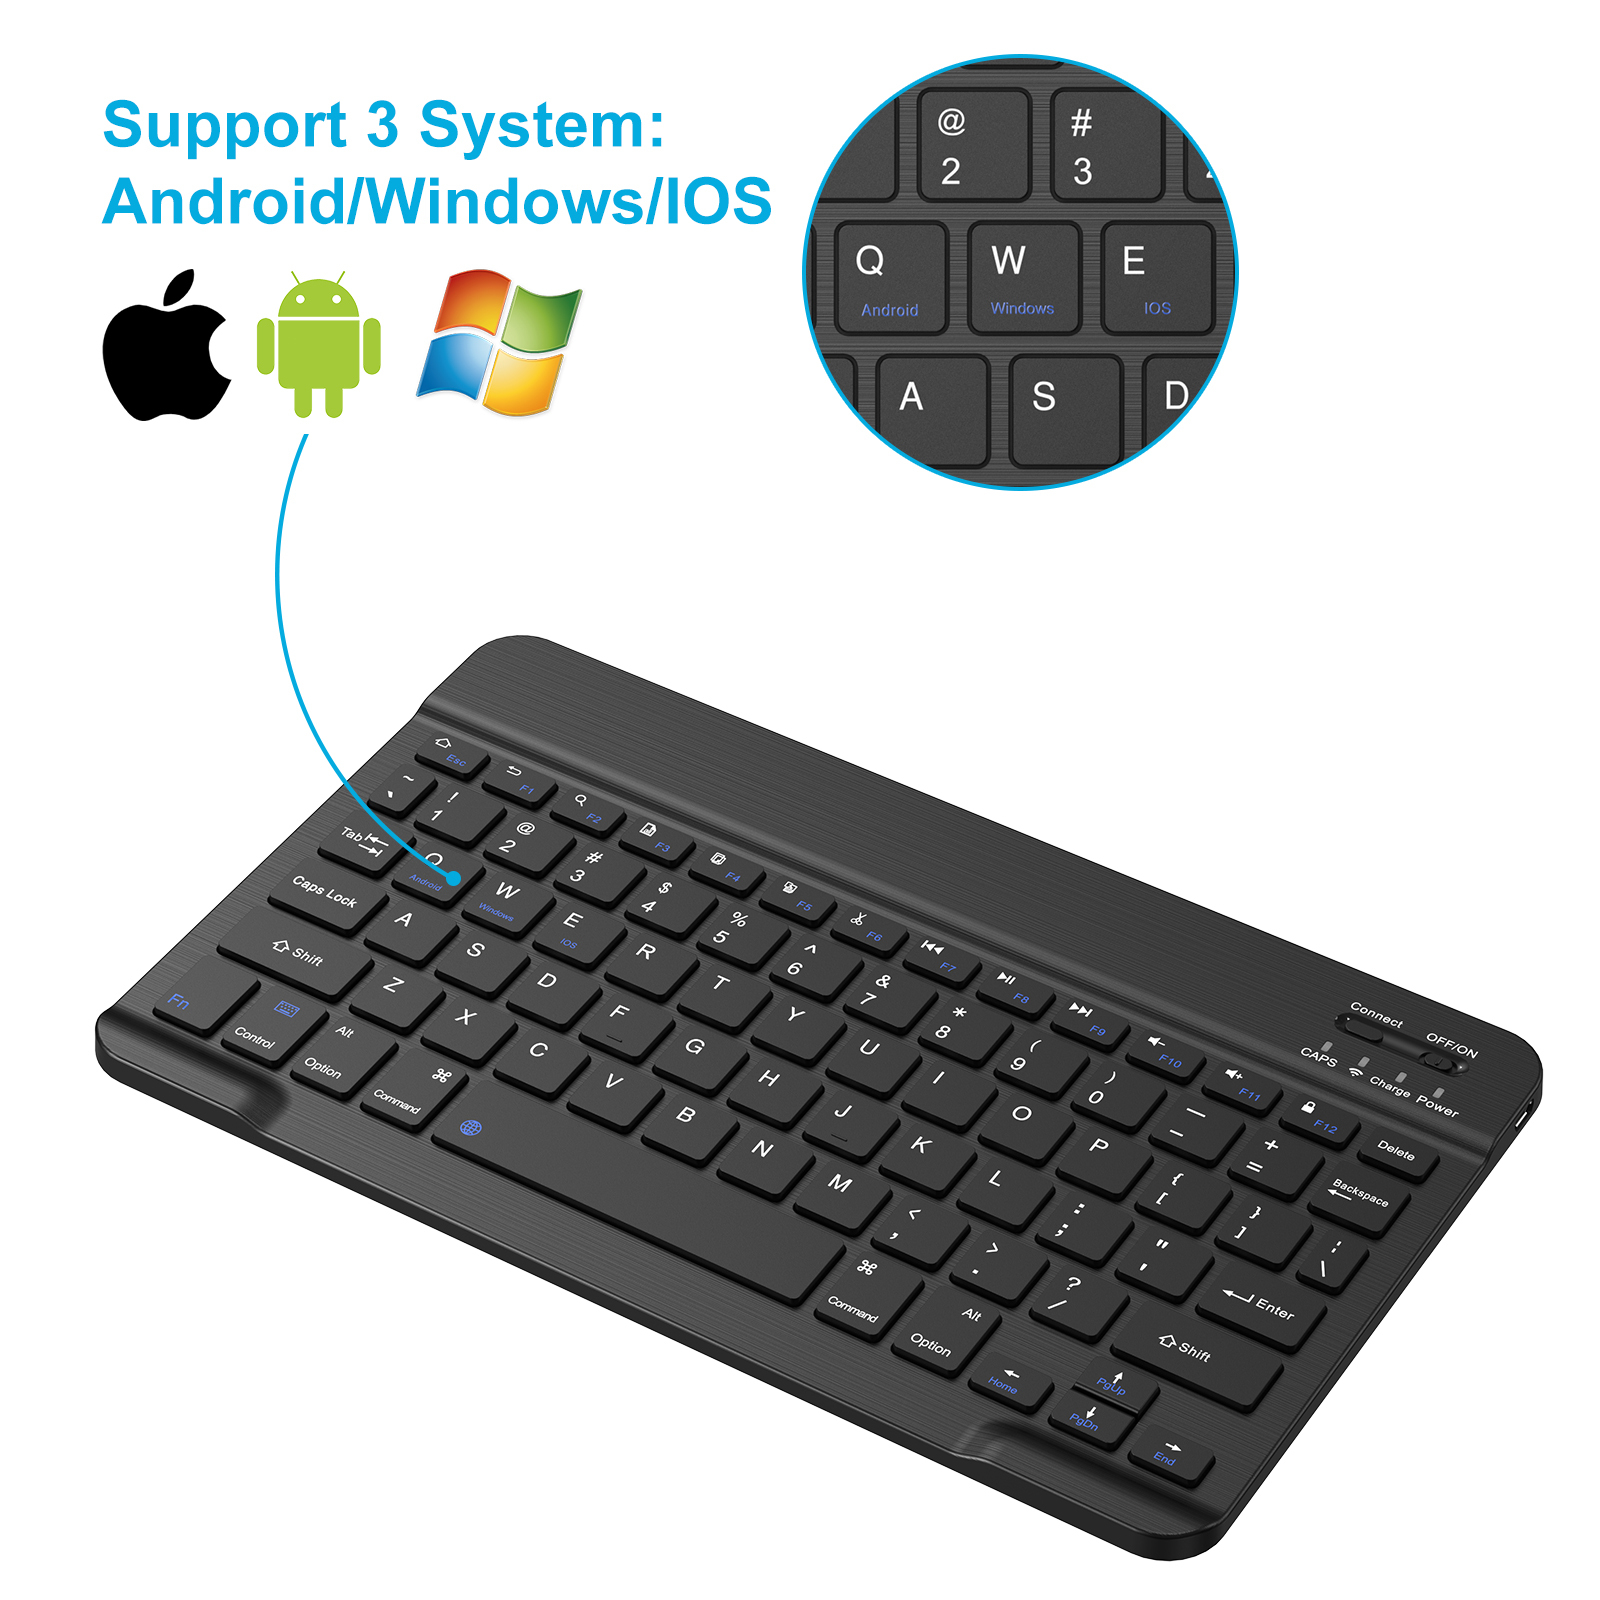 Cimetech Bluetooth Keyboard, Ultra-Slim Wireless Keyboard Quiet Portable Design with Built-in Rechargeable Battery for IOS, Mac, iPad, Windows and Android 3.0 and Above OS Black - image 5 of 8